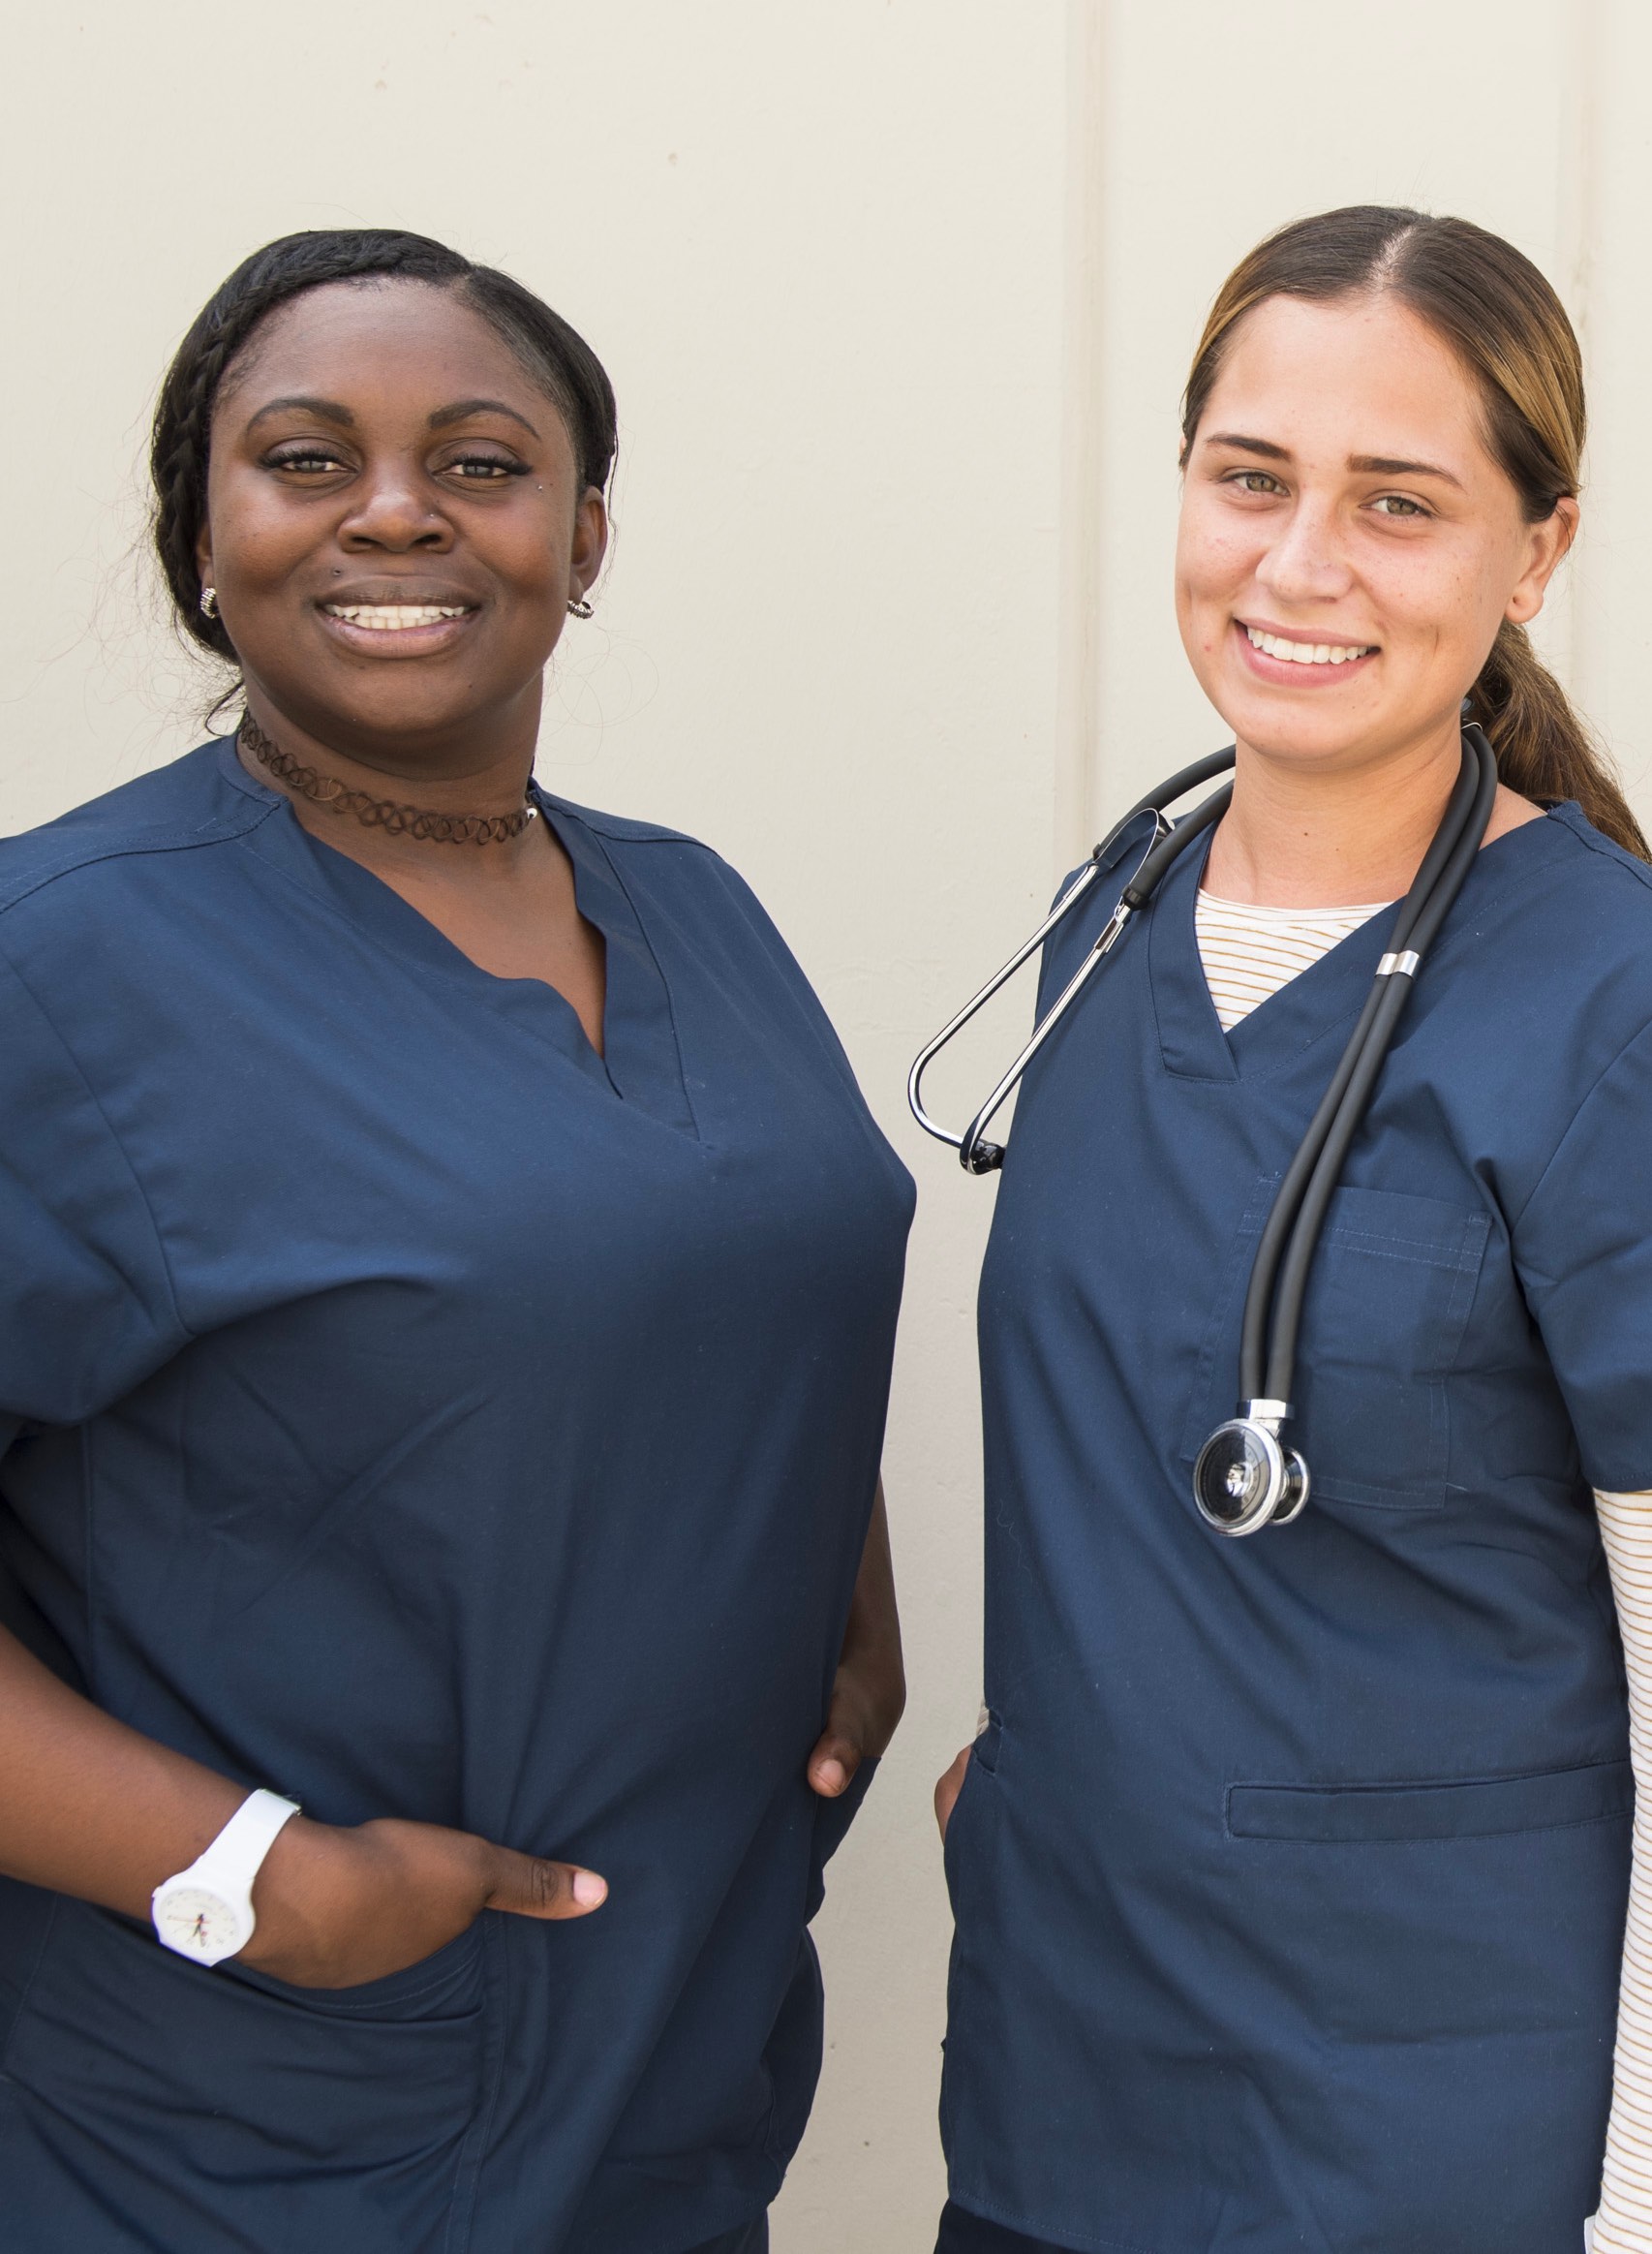 A young black woman and a young white woman, both in navy blue medical scrubs and smiling